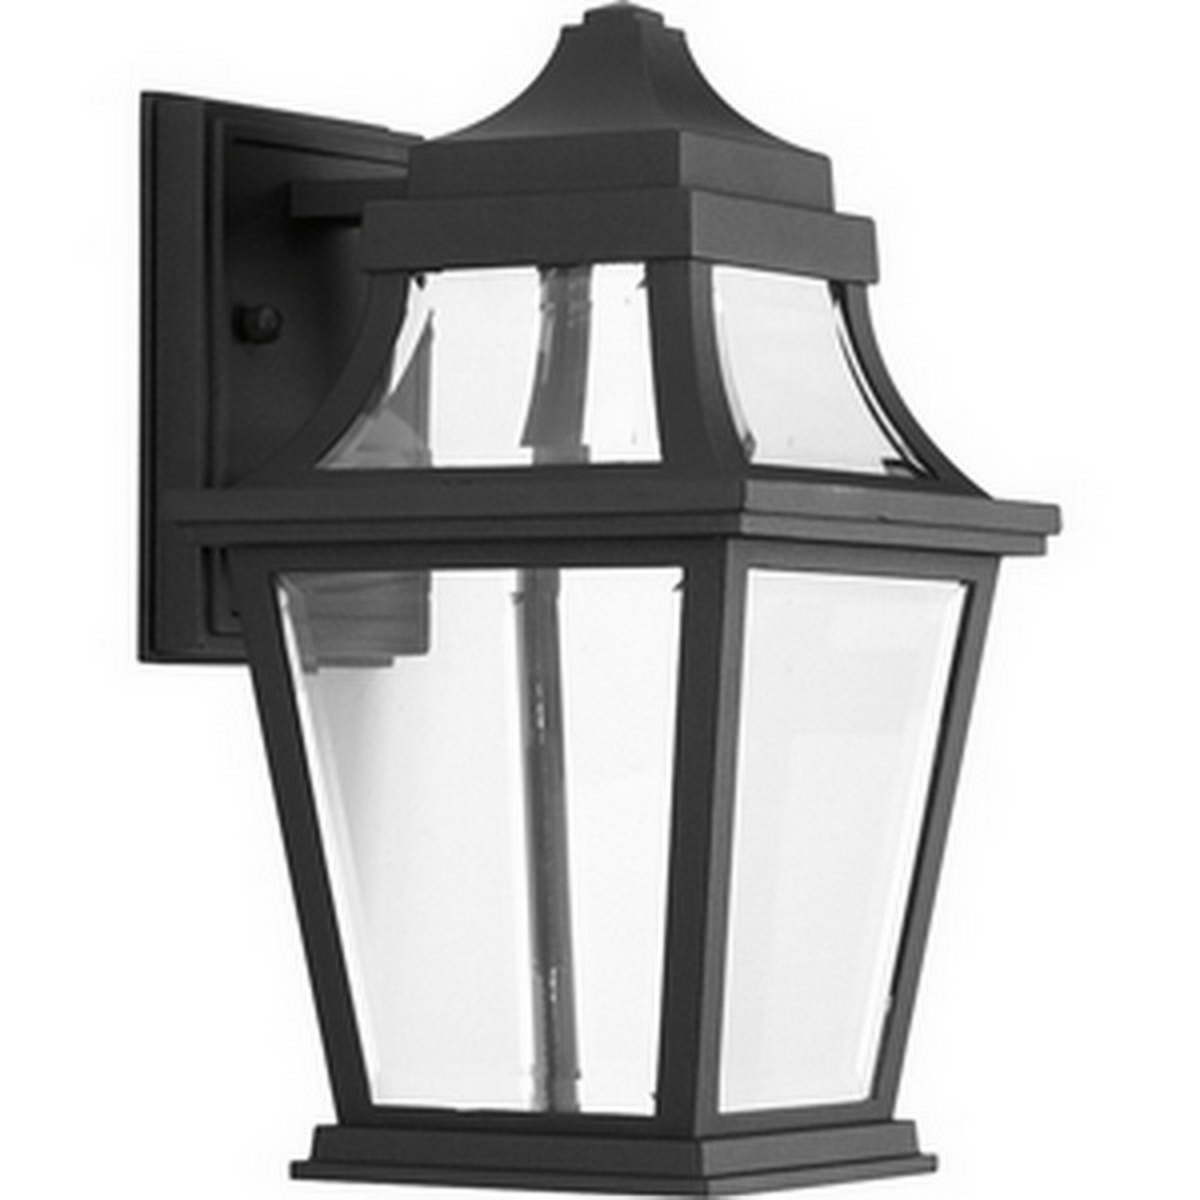 Endorse 12 in. LED Outdoor Wall Light 623 Lumens 3000K Black Finish